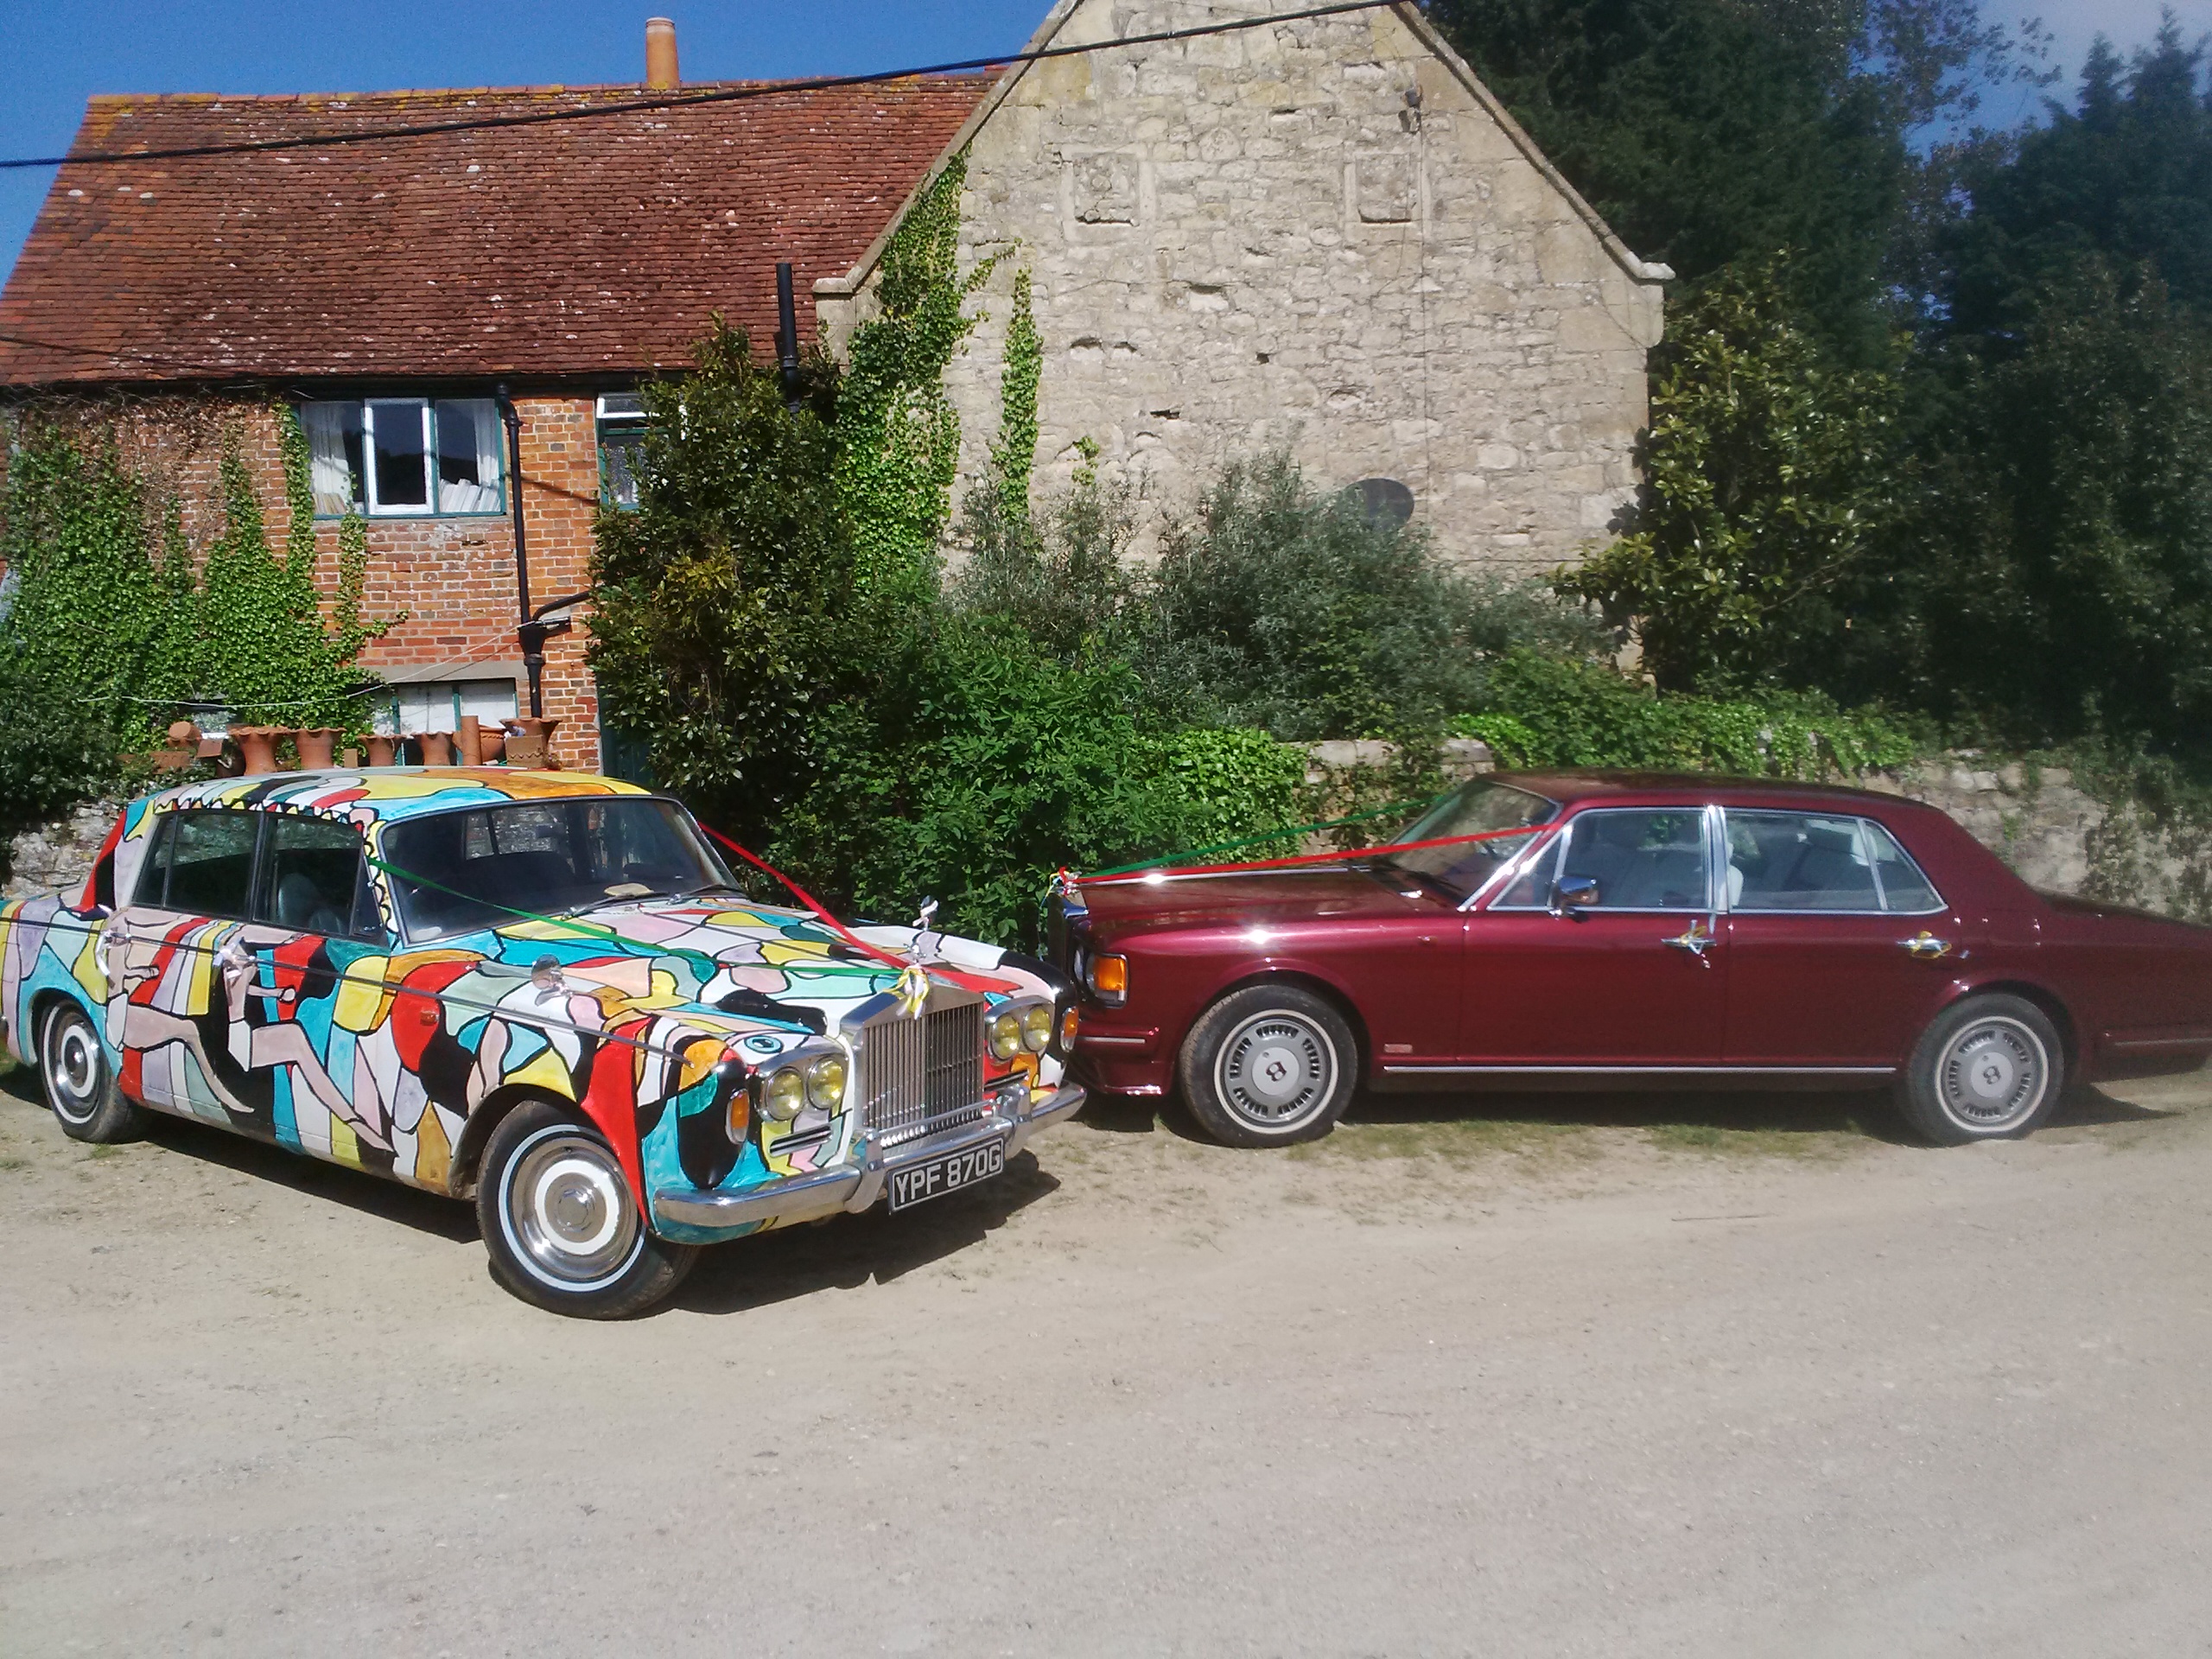 Two wedding cars! Bentley Turbo R and Wight 1969 Rolls-Royce Silver Shadow Art Car (ArtCar). Painting by BB Bango Modifiaction with Burmese dresses on